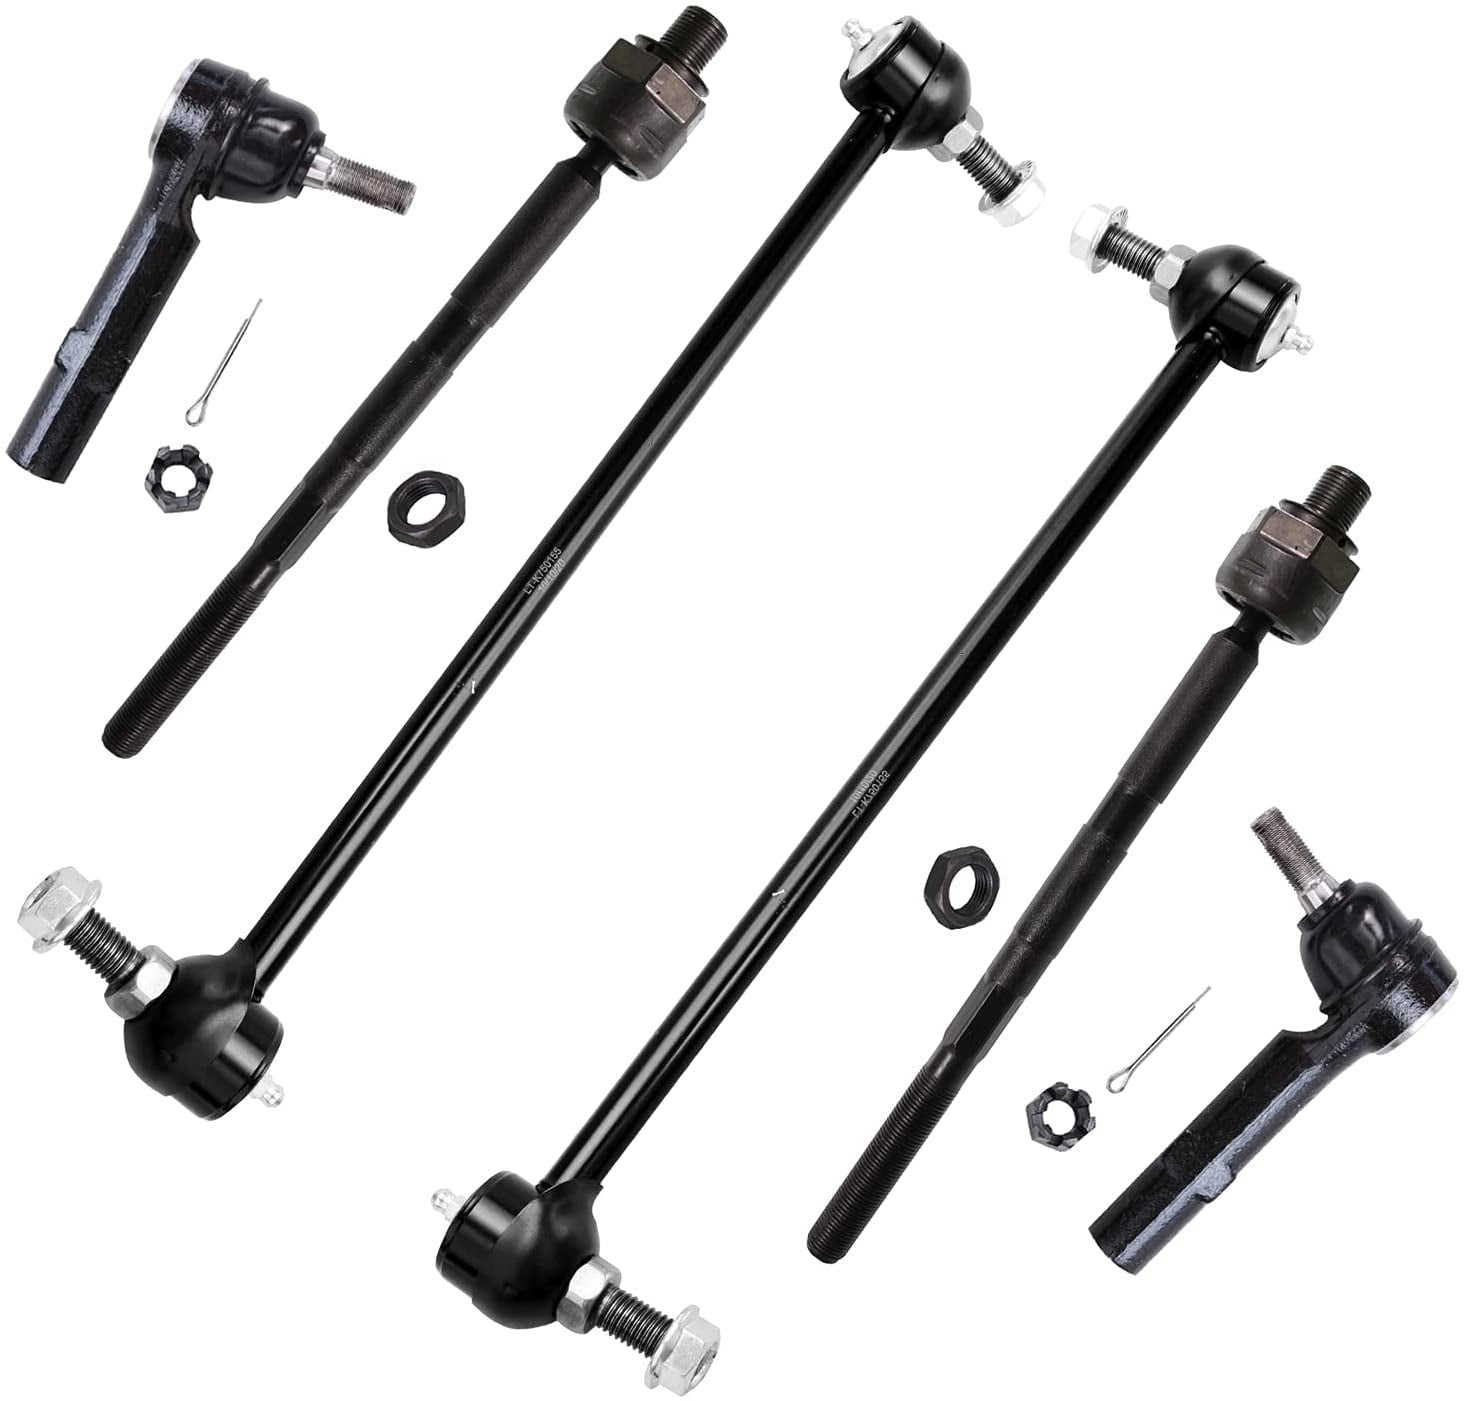 Detroit Axle 2 Rack and Pinion Tie Rod Boots & Bellows… 4 Brand New Complete 10-Piece Front Suspension Kit All Front & Rear Sway Bar Links 4 Inner & Outer Tie Rod Ends 10-Year Warranty- All 